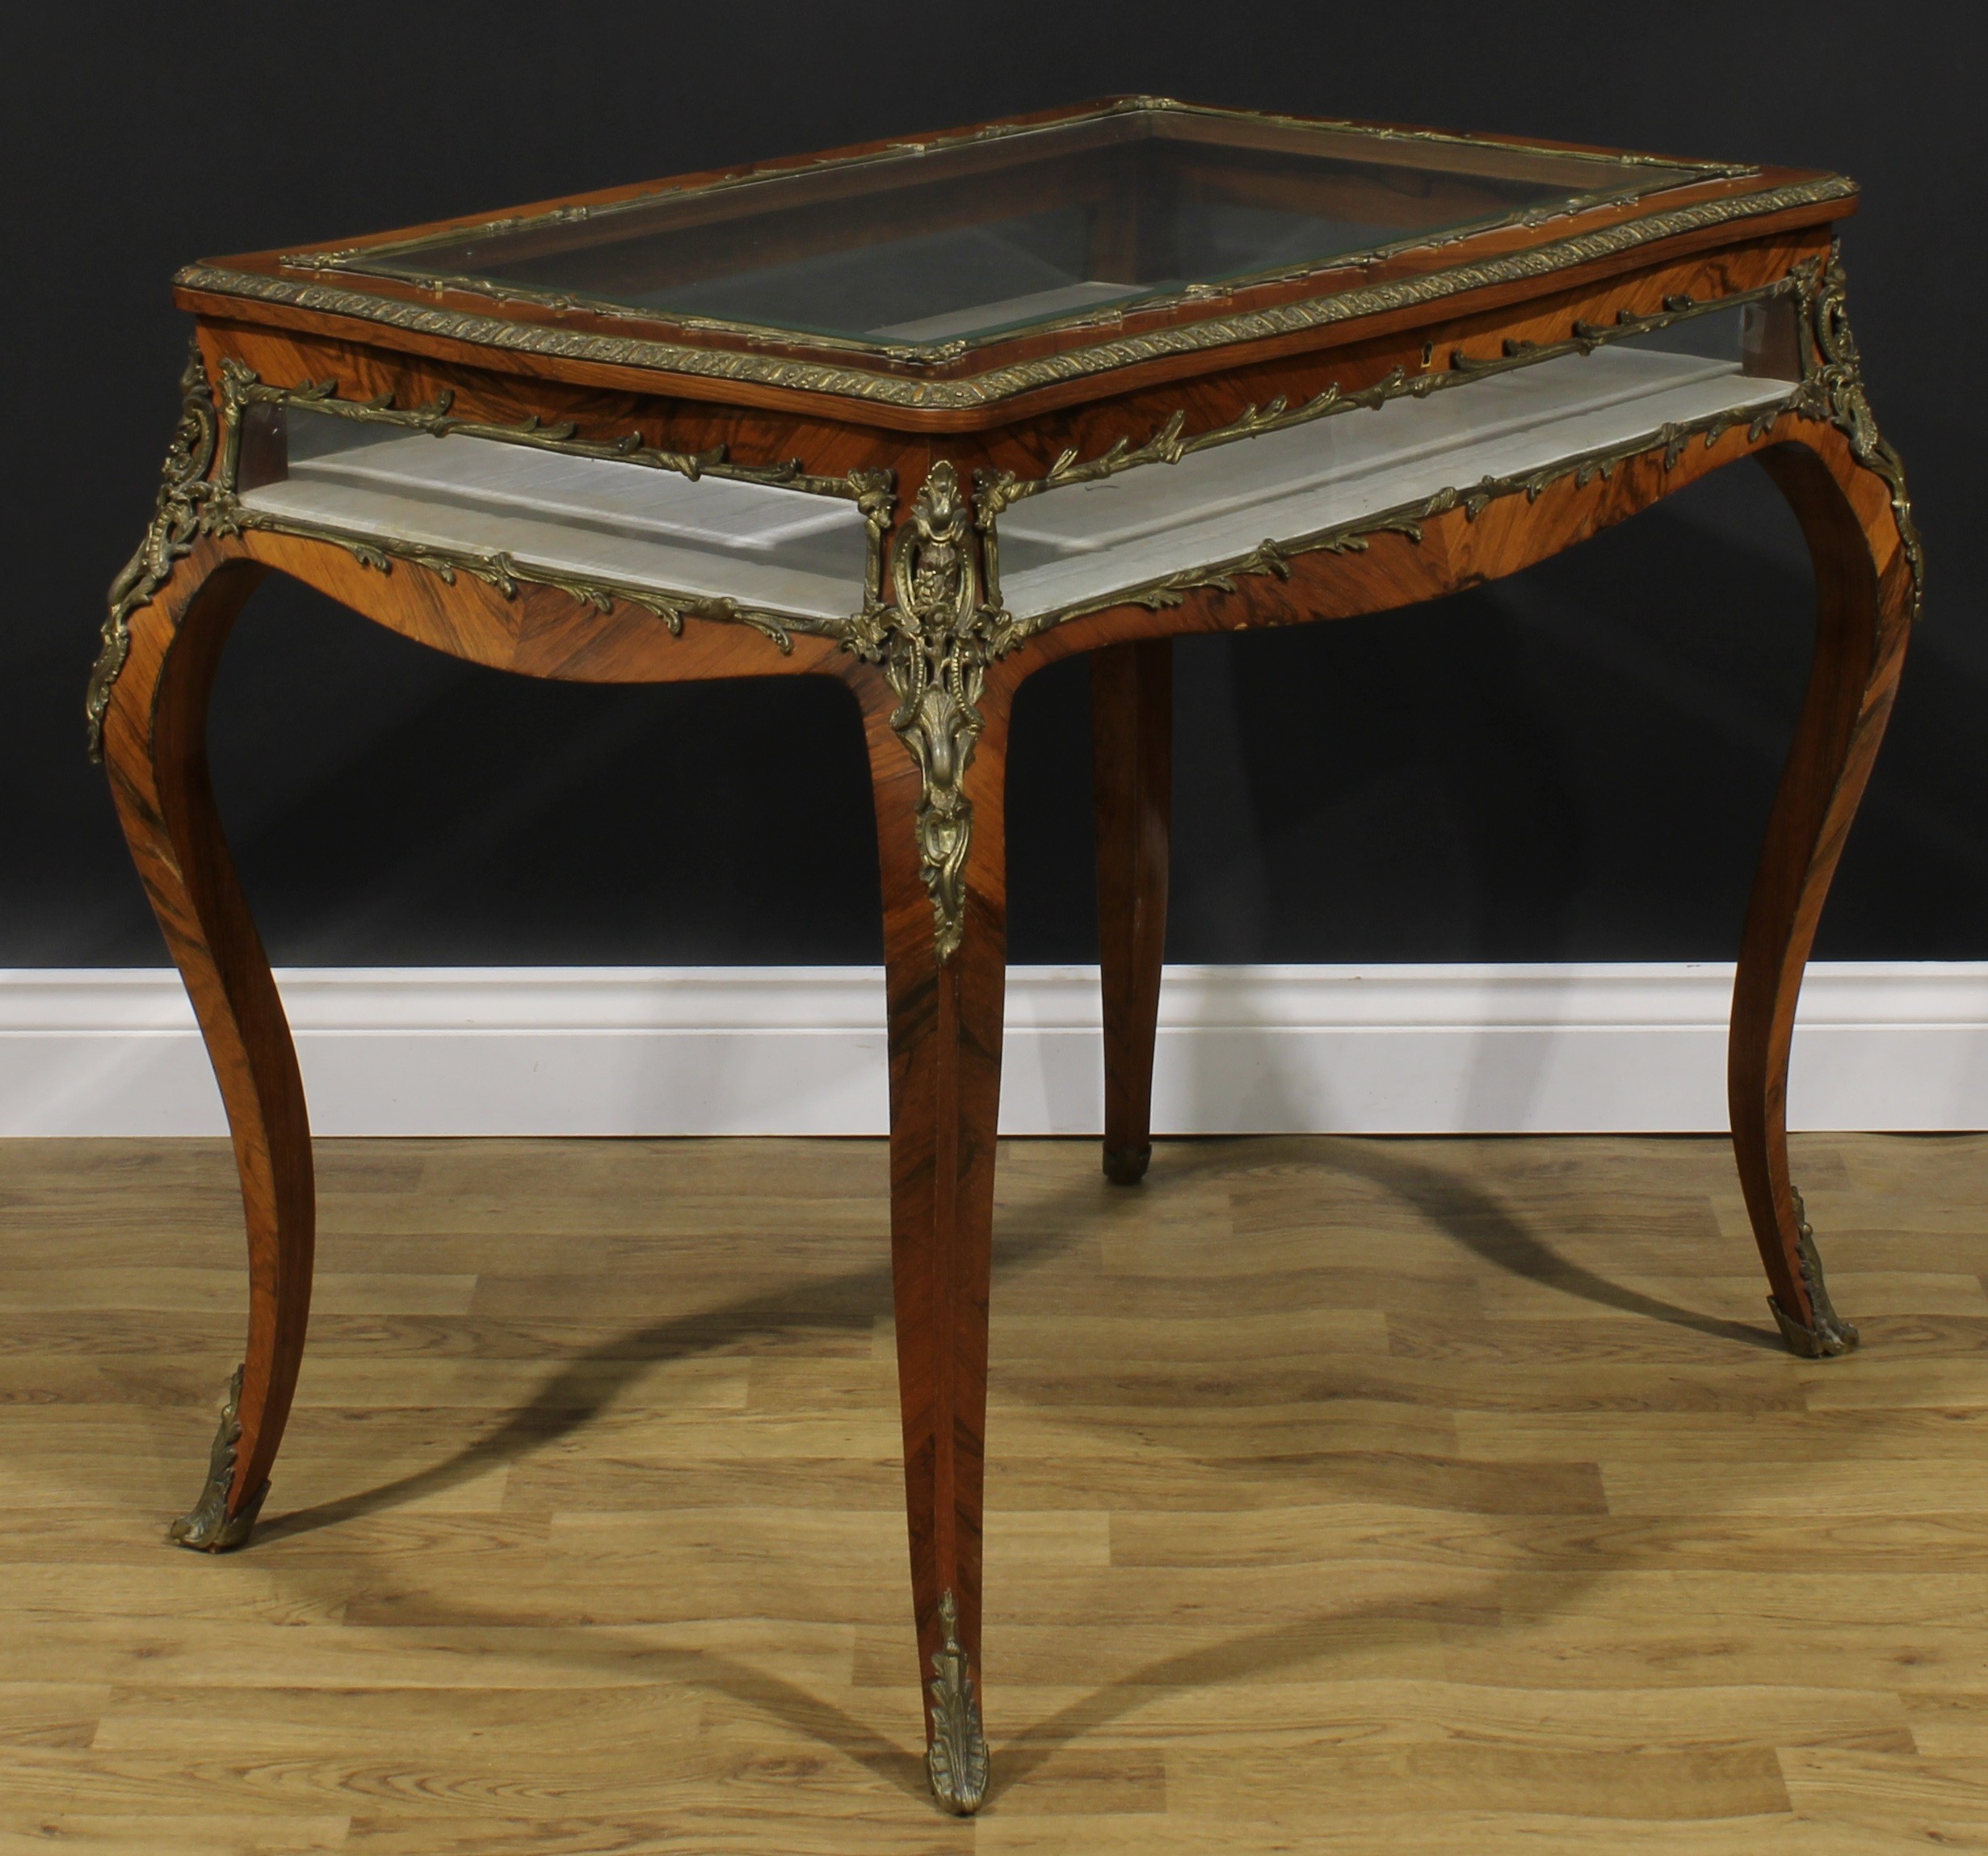 A Louis XV Revival gilt metal mounted rosewood bijouterie table, hinged top, French cabriole legs, - Image 2 of 4